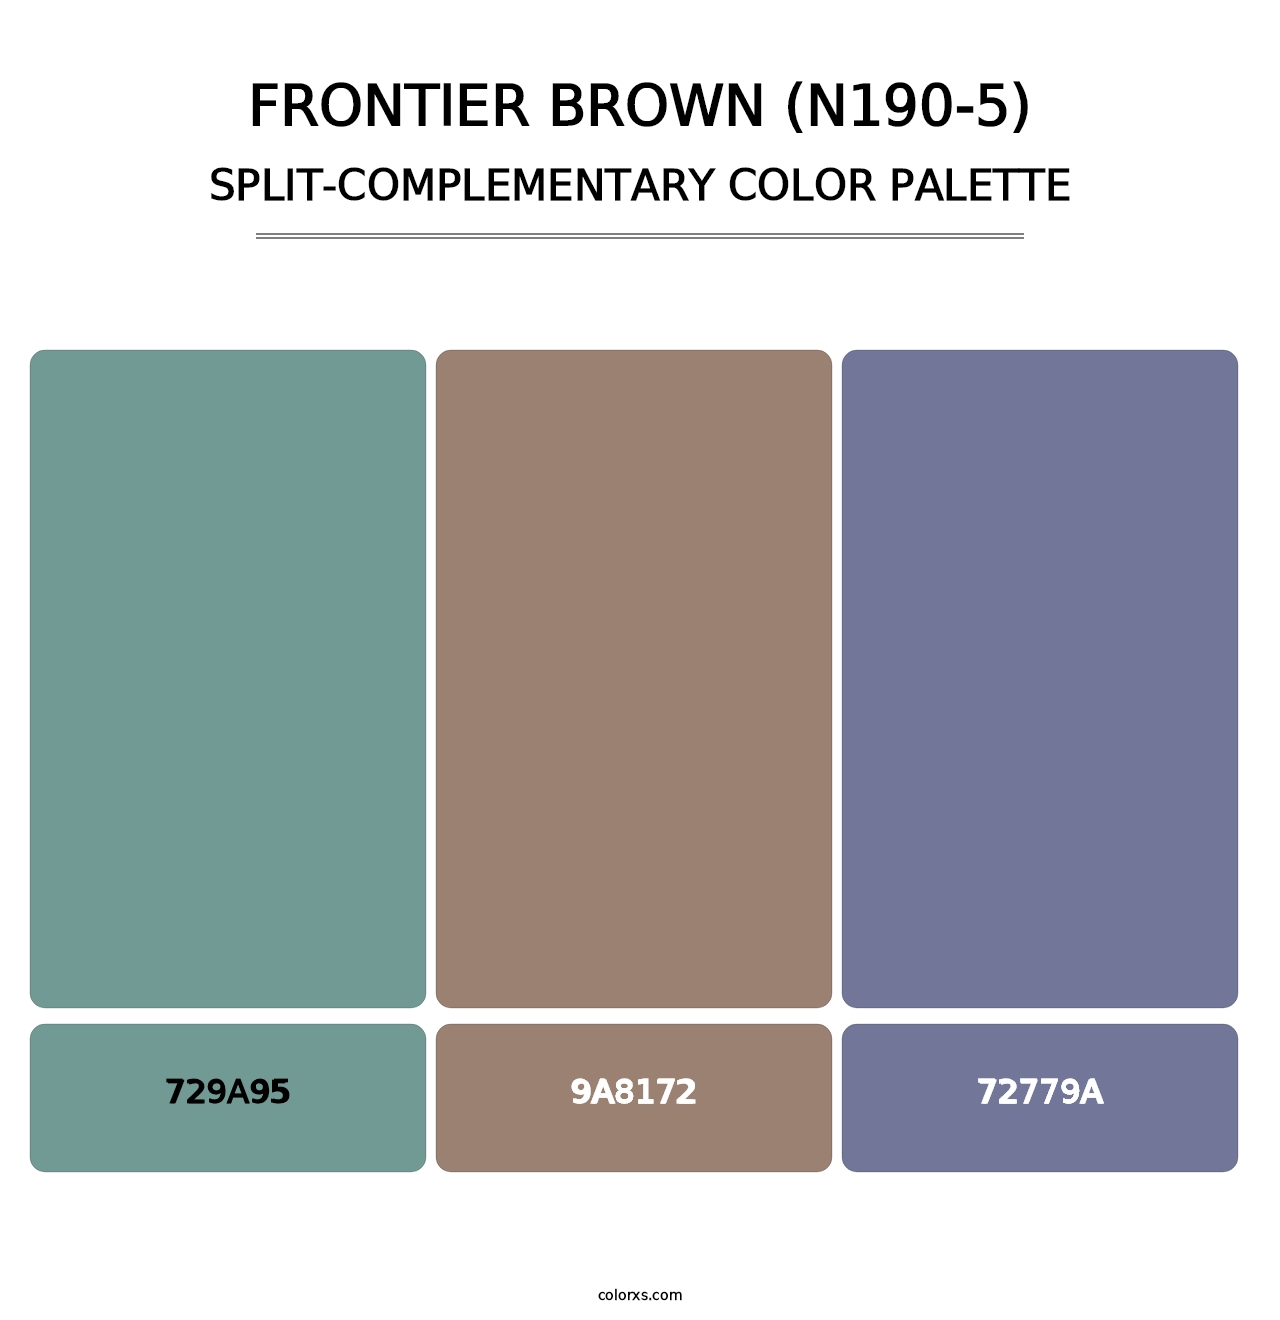 Frontier Brown (N190-5) - Split-Complementary Color Palette